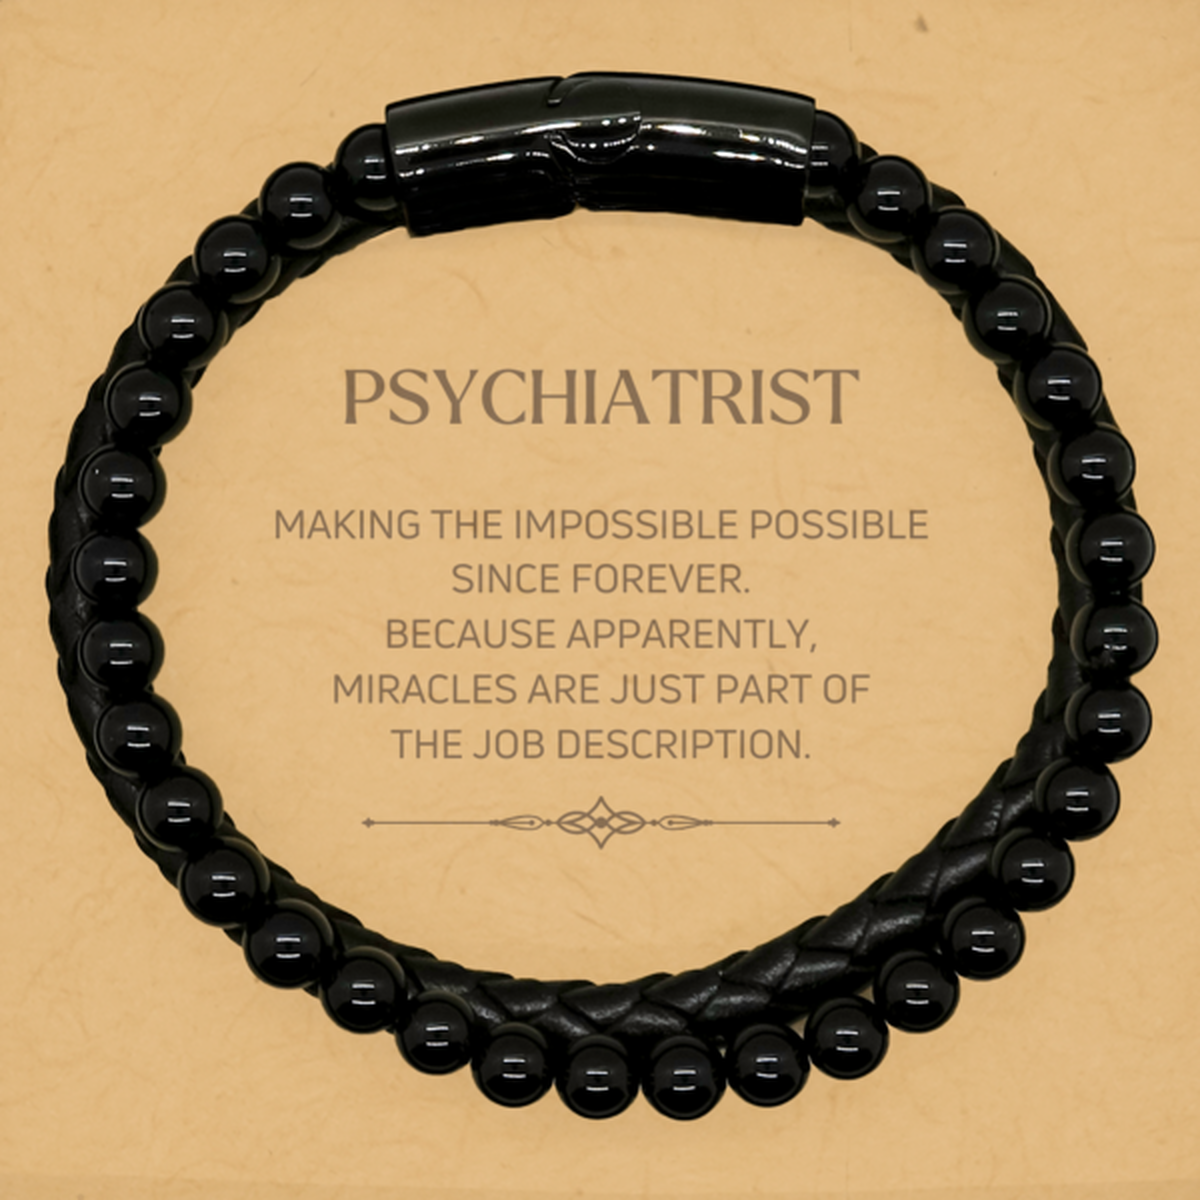 Funny Psychiatrist Gifts, Miracles are just part of the job description, Inspirational Birthday Stone Leather Bracelets For Psychiatrist, Men, Women, Coworkers, Friends, Boss